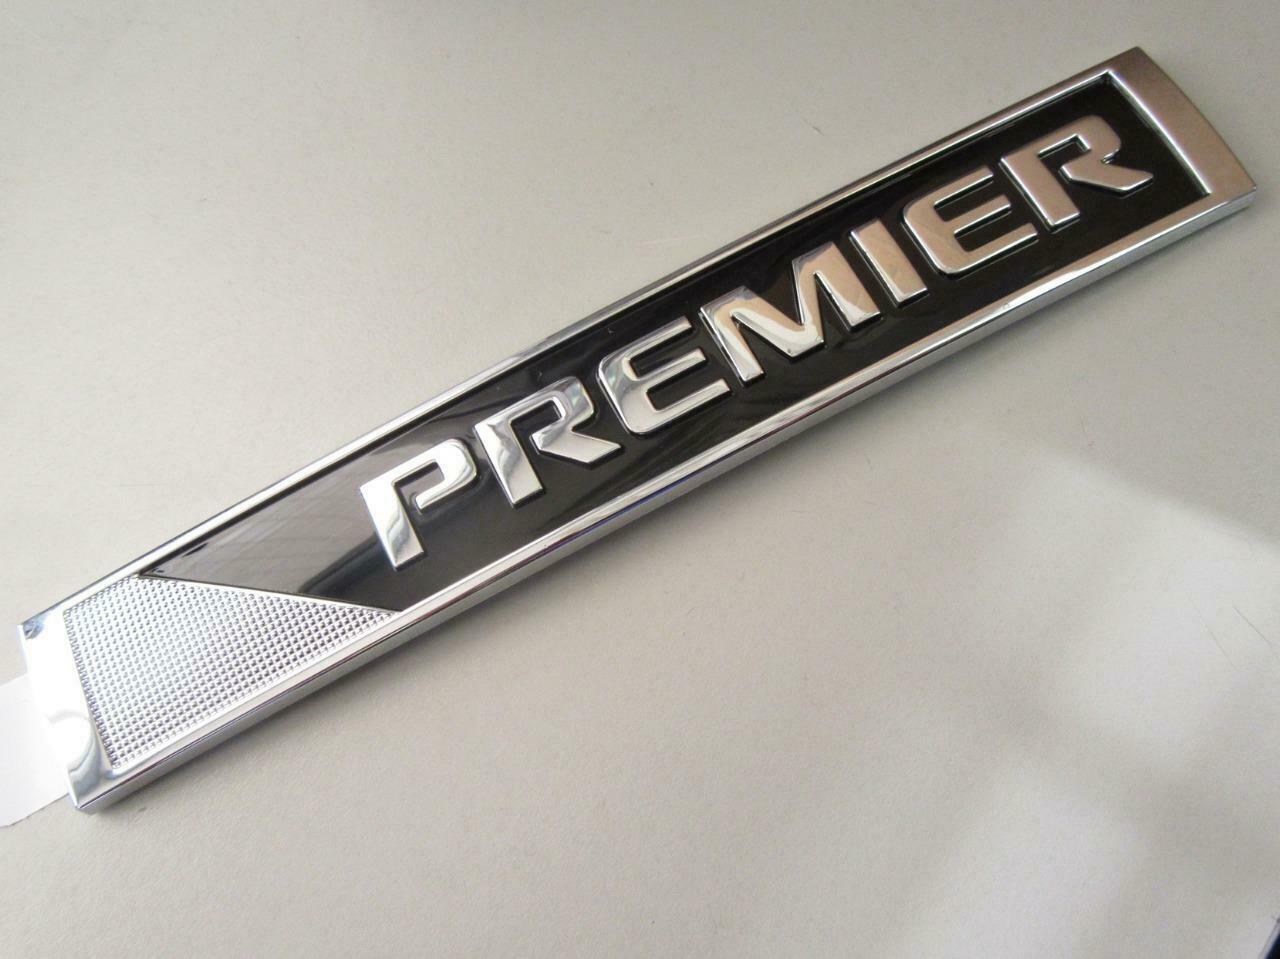 Primary image for OEM 2017-18 Chevy Traverse Equinox Premier Sign Emblem Decal Nameplate 23505738